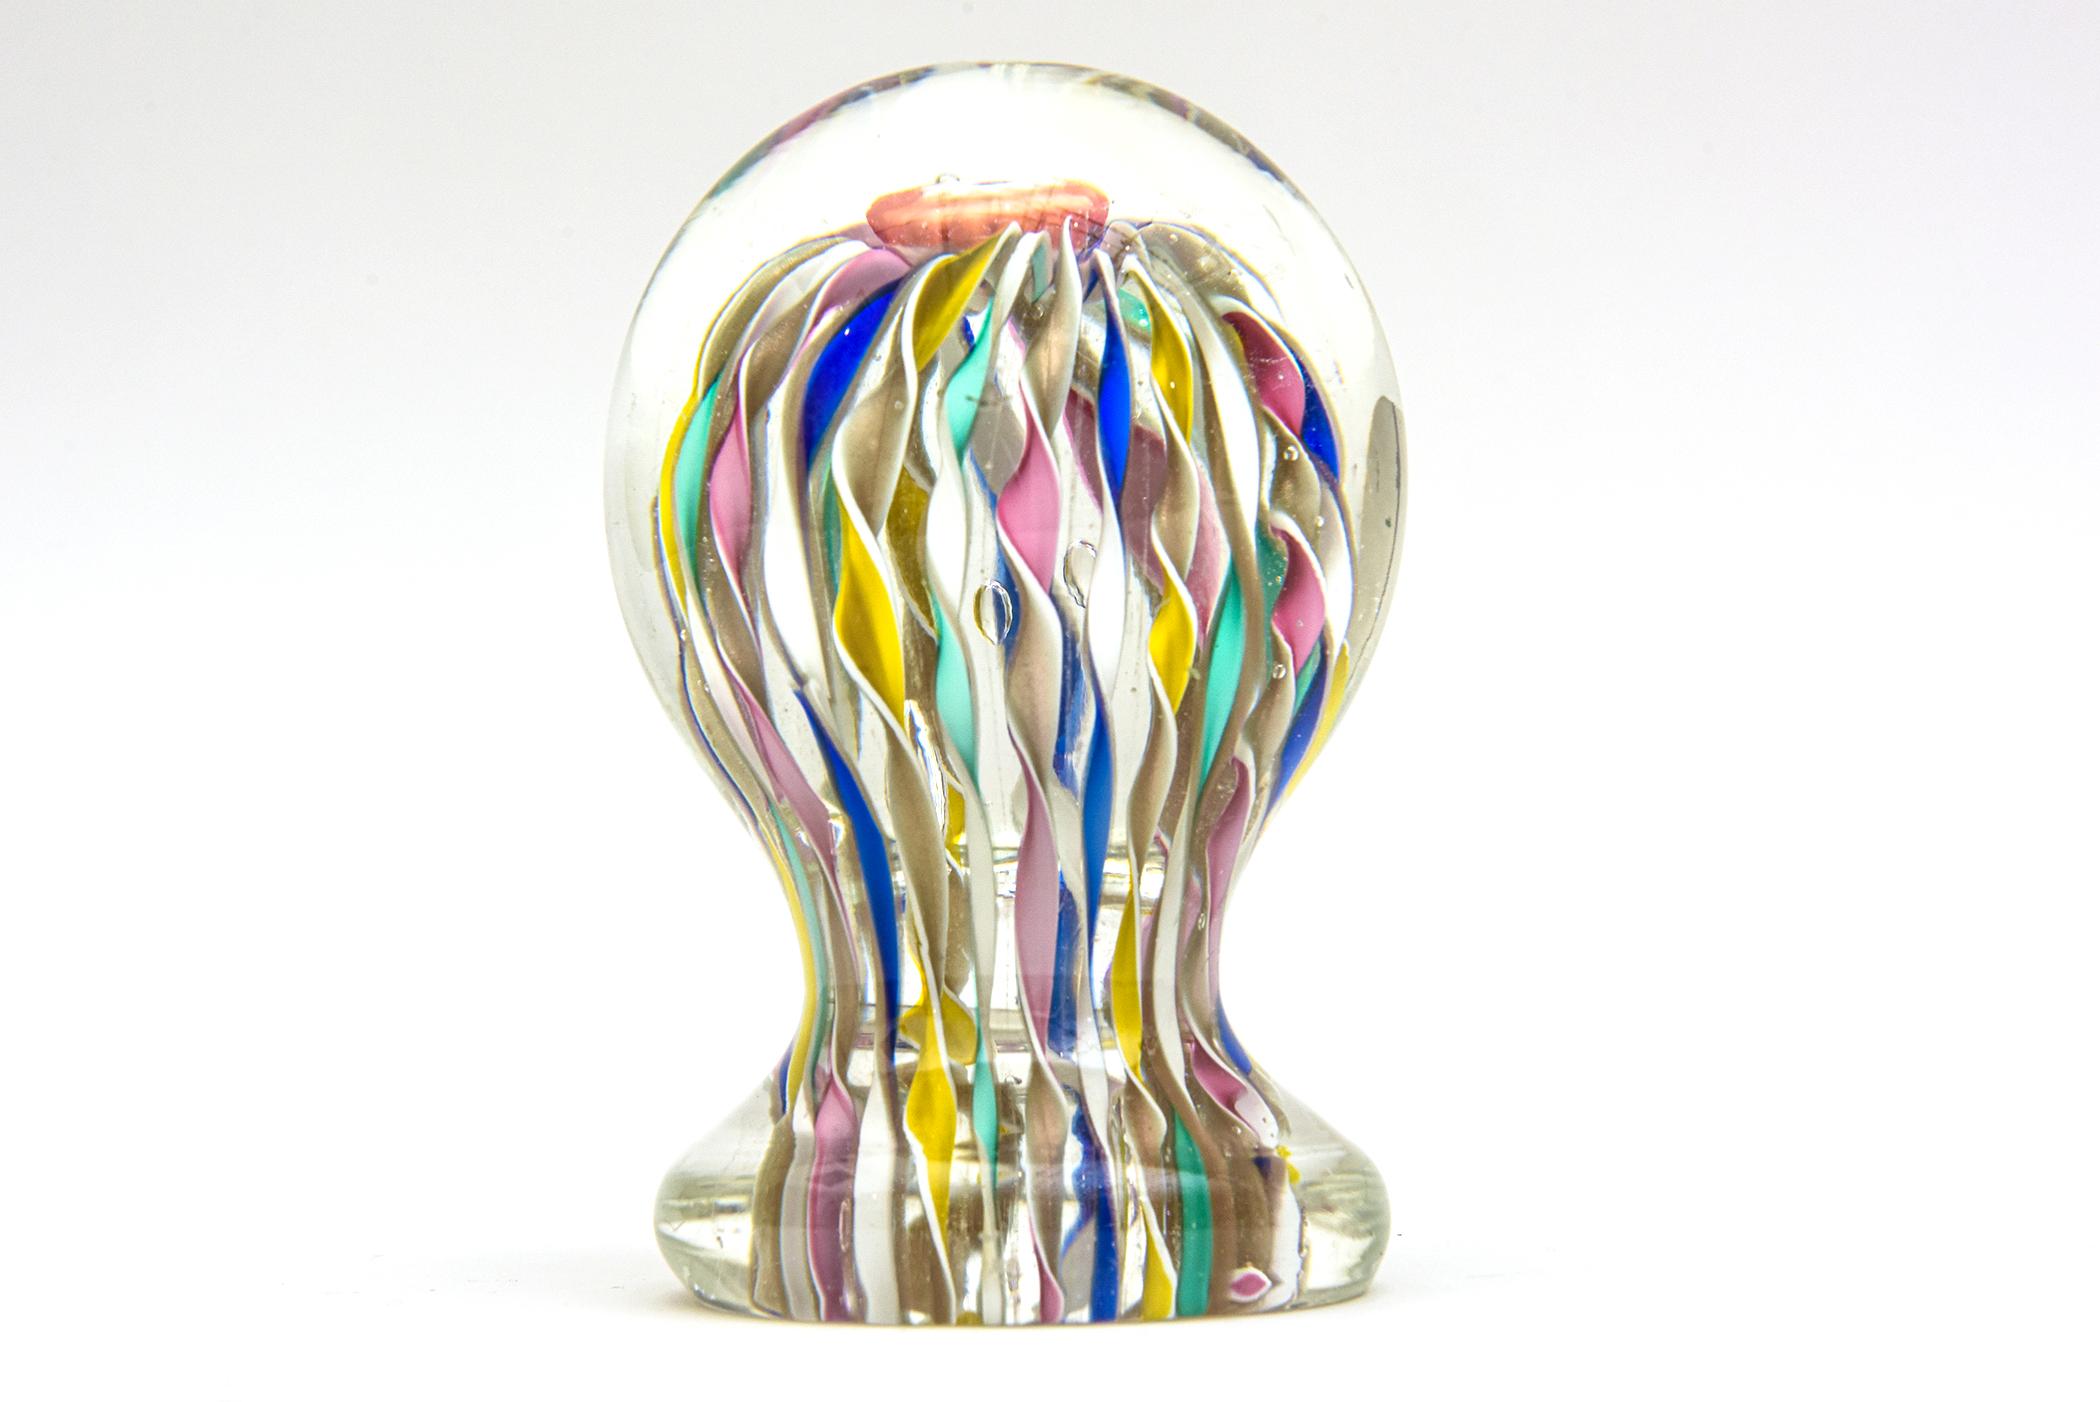 This colorful Italian Murano hand blown glass paperweight sculpture has a dome mushroom top with internal cascading colorful ribbons of glass called Latticino. The colors are rich and range from royal blue, pink, mint green, mustard yellow, white